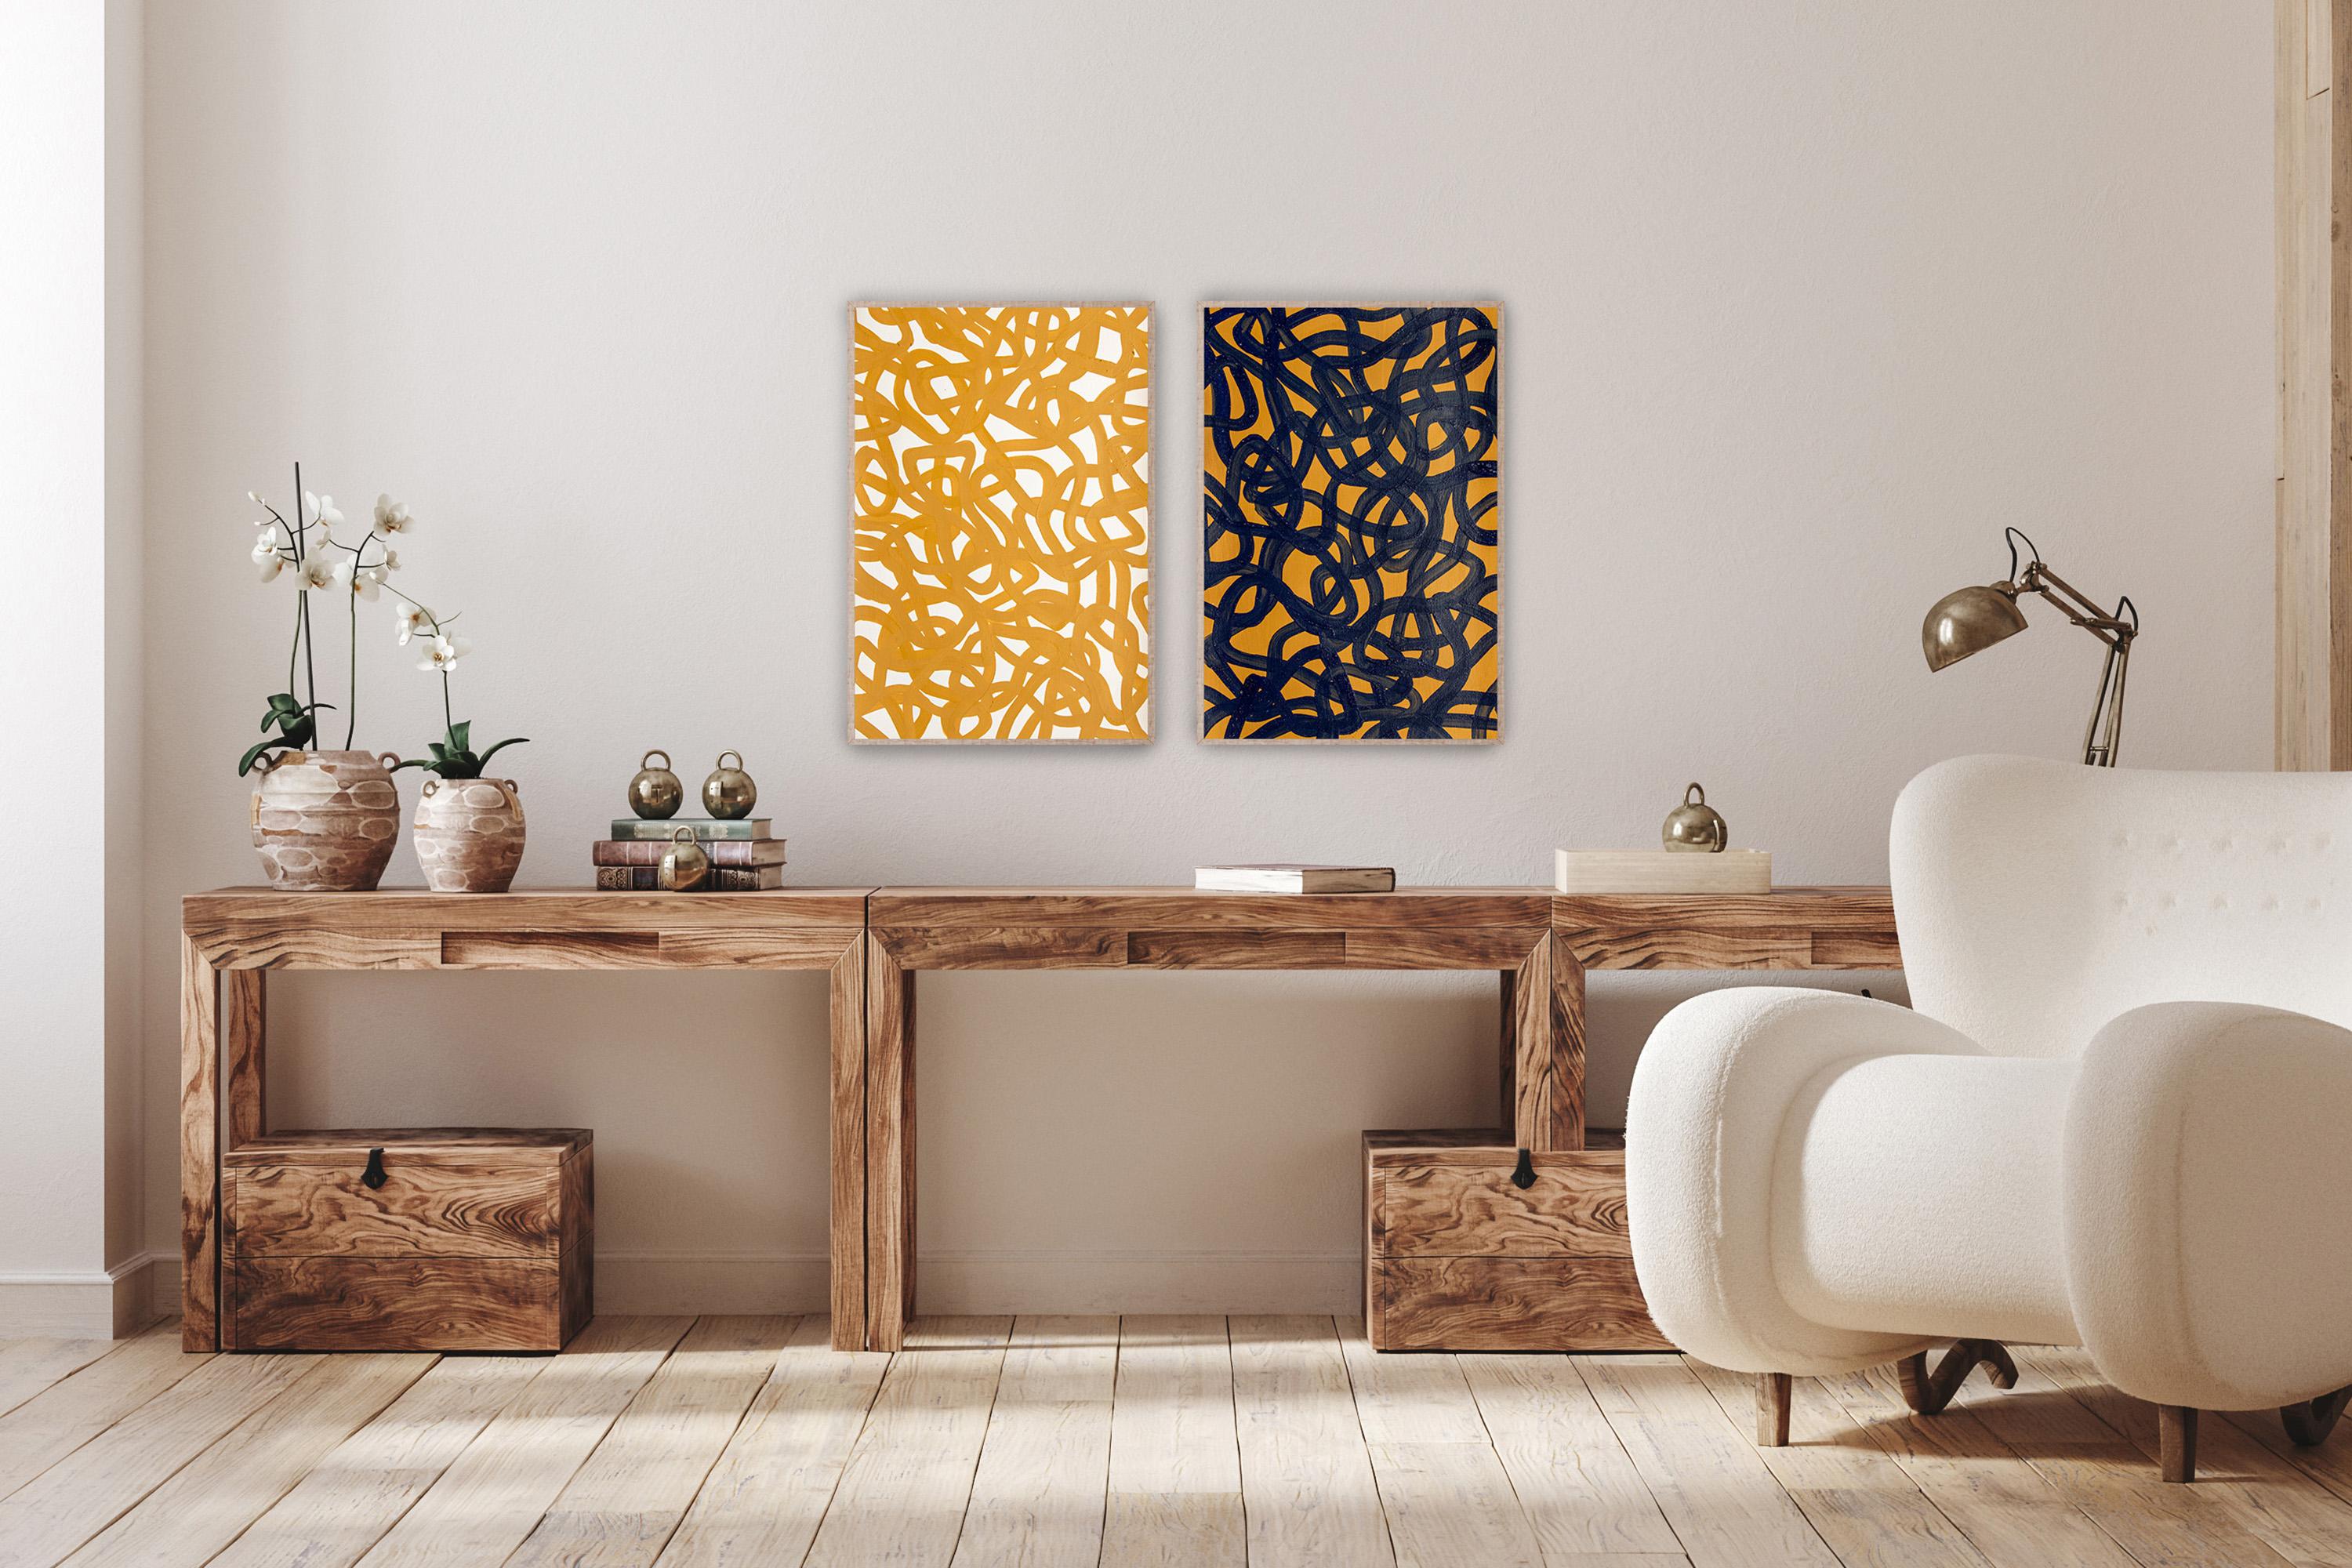 Ochre and Black Diptych, Overlapping White Abstract Fish Gestures, Mediterranean For Sale 2